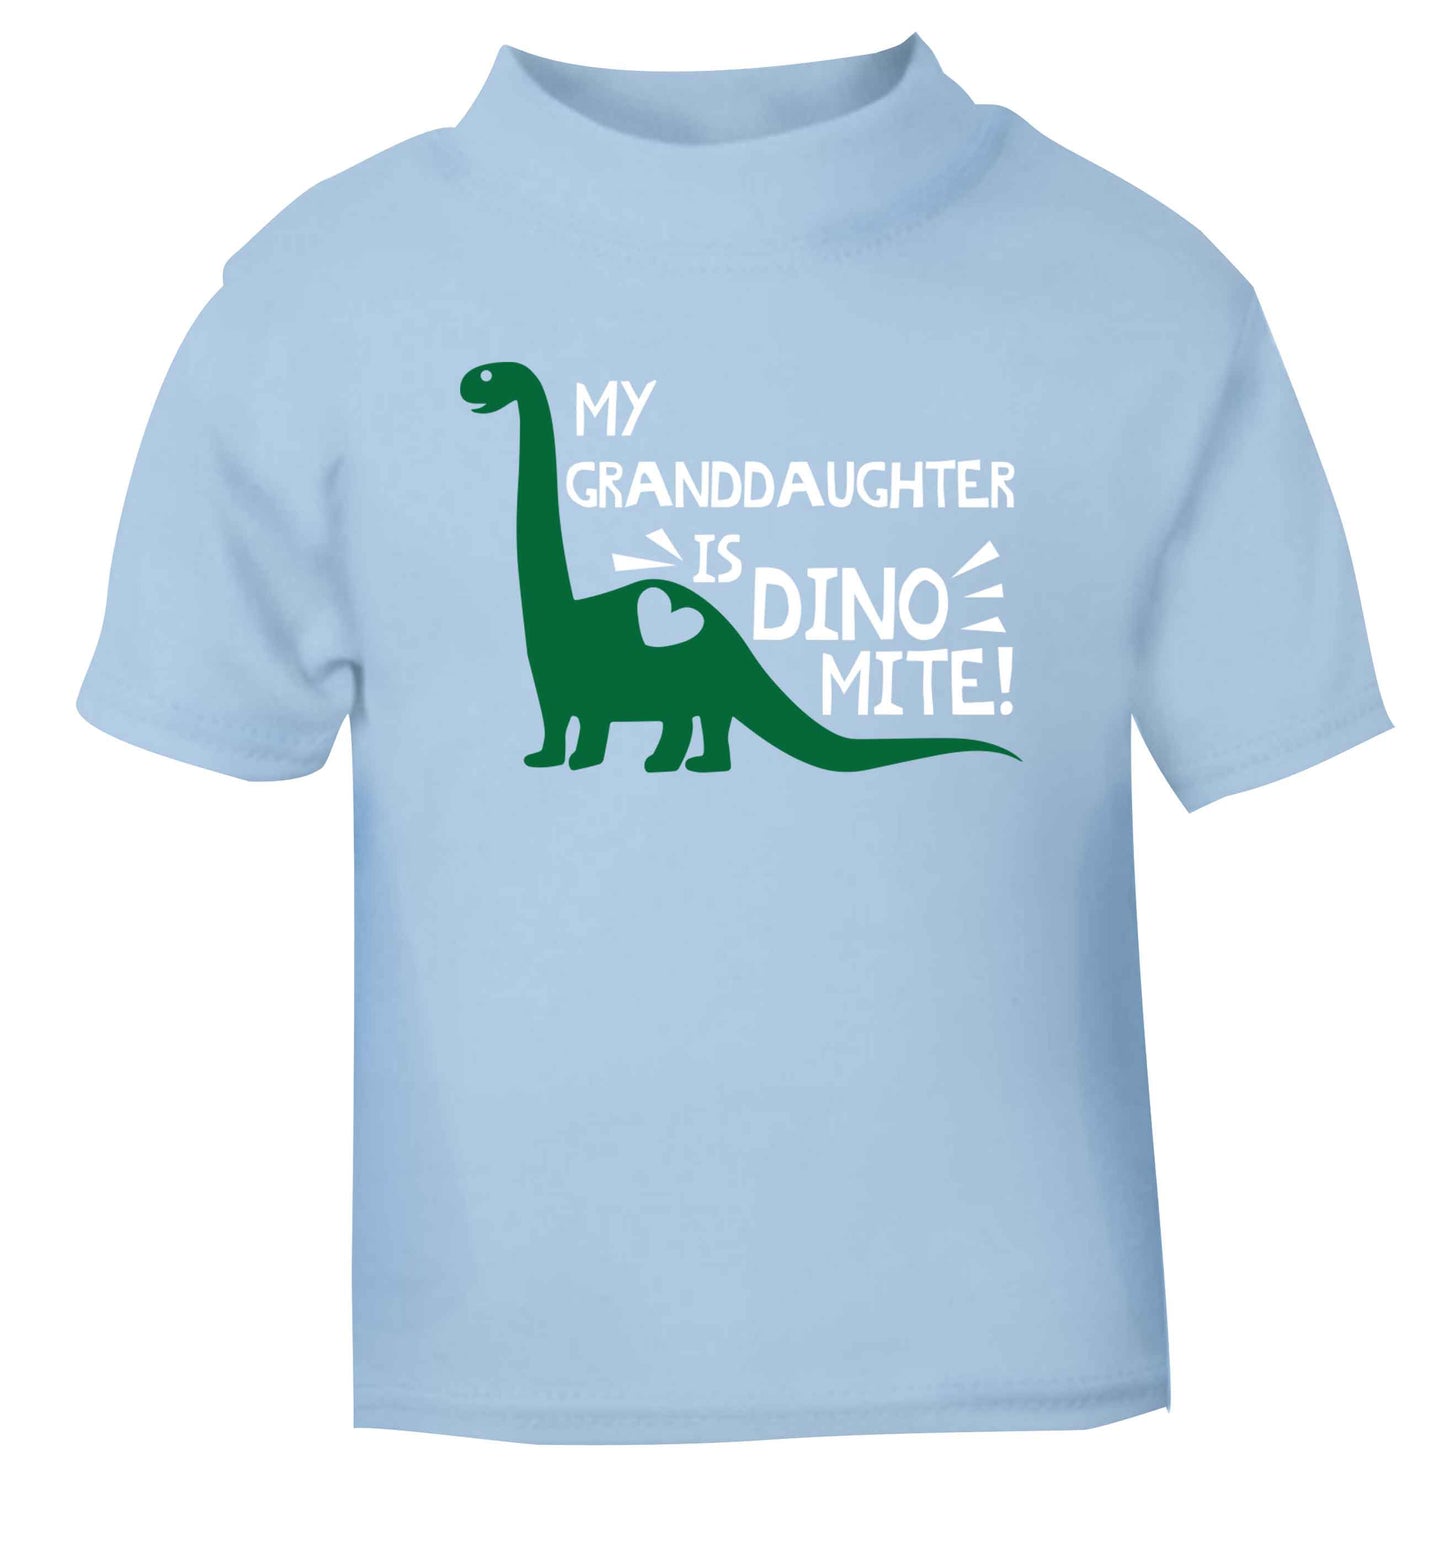 My granddaughter is dinomite! light blue Baby Toddler Tshirt 2 Years